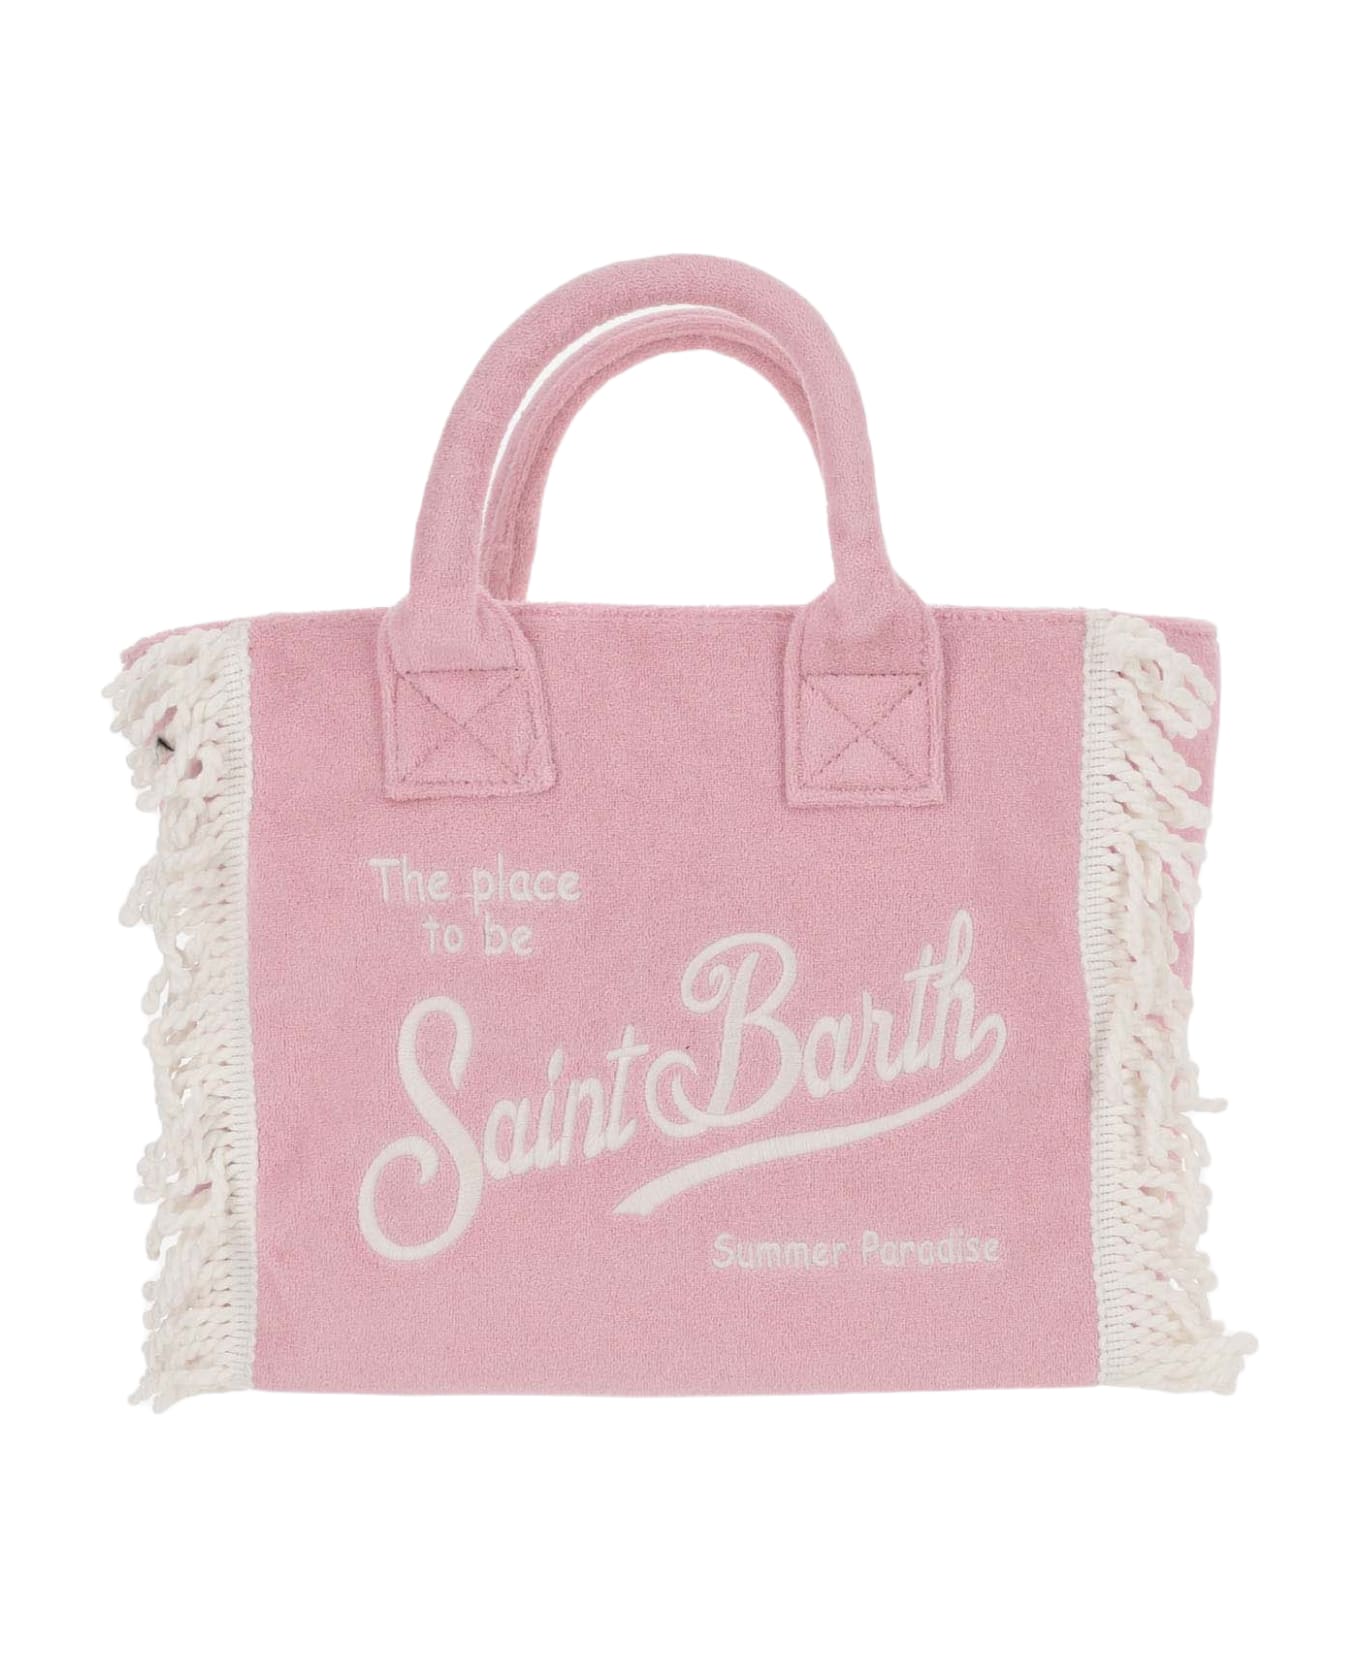 MC2 Saint Barth Colette Terry Tote Bag With Embroidery - Pink